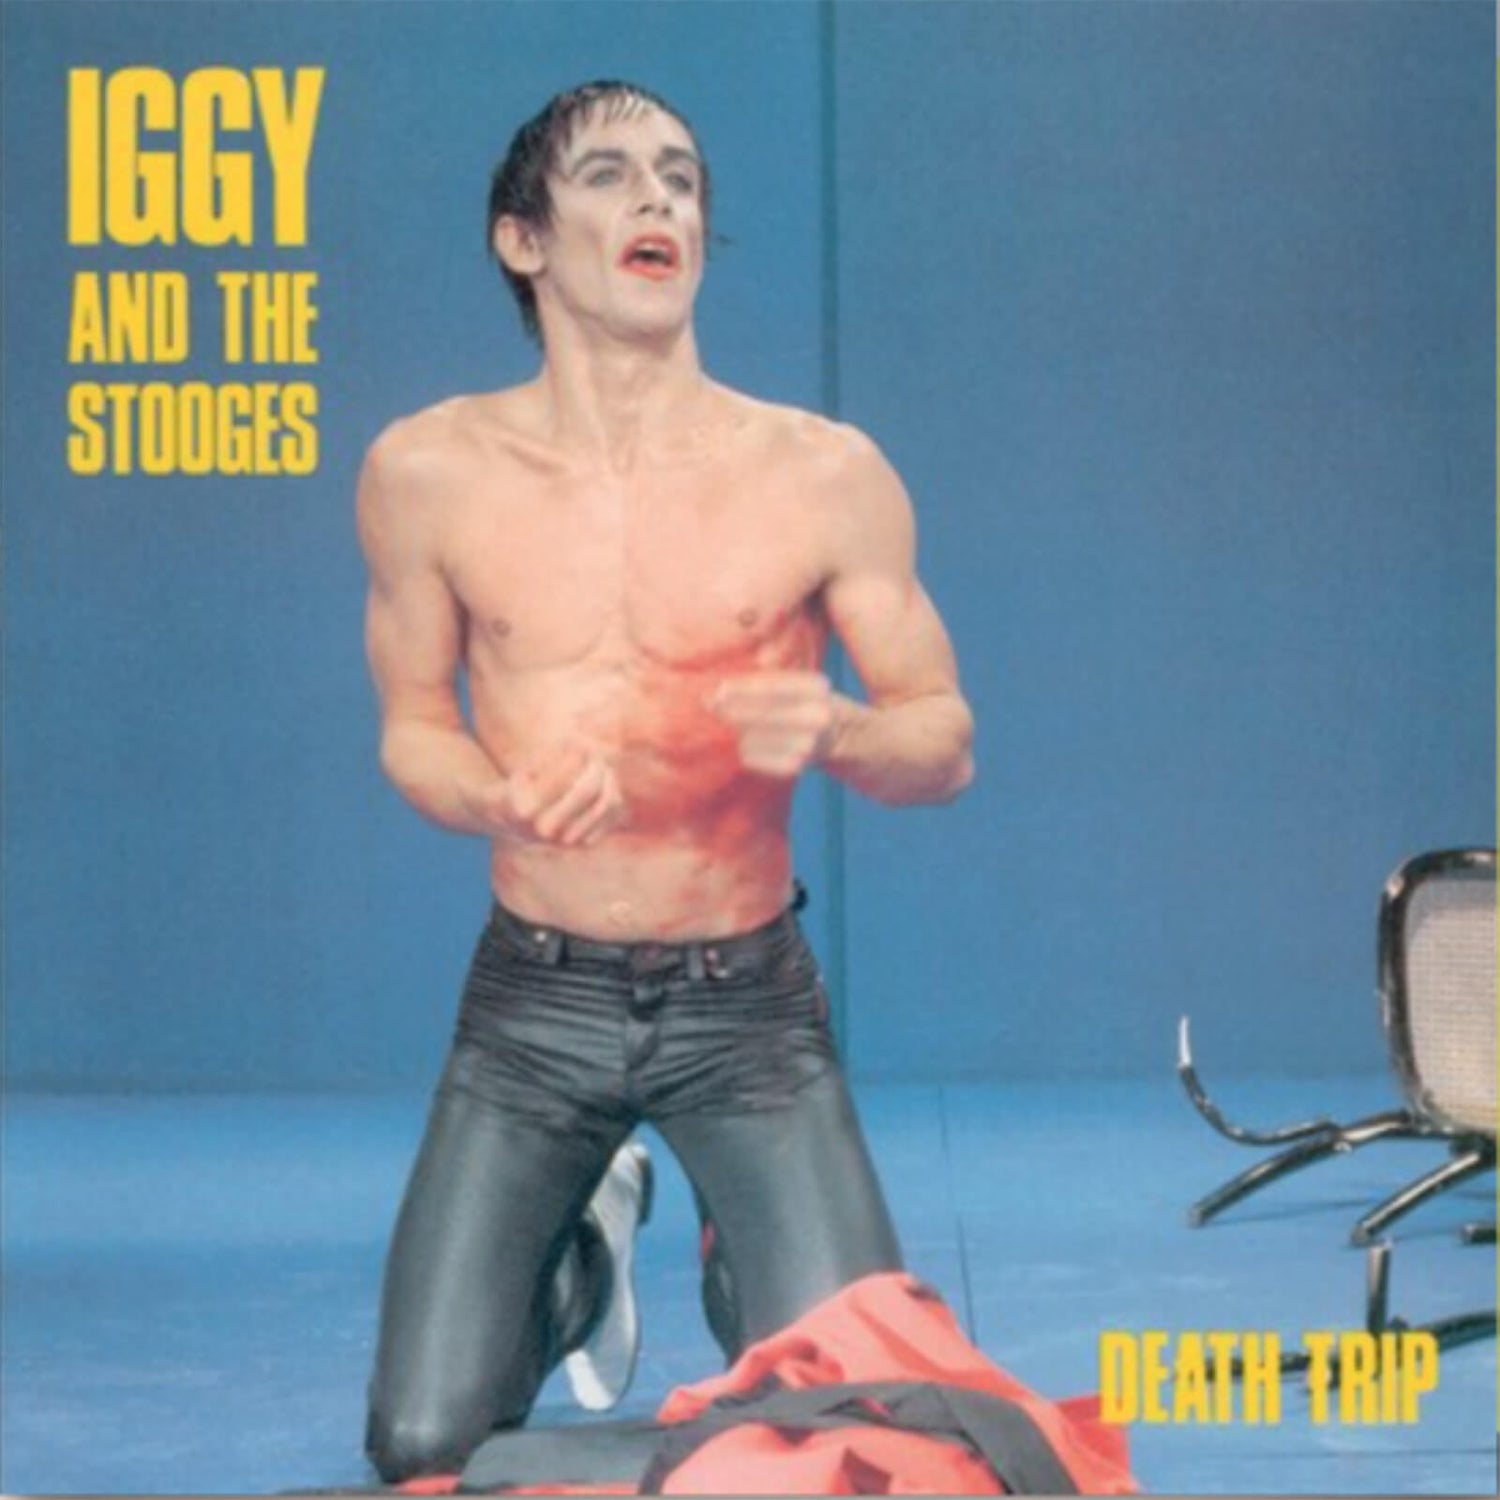 Iggy And The Stooges - Death Trip Vinyl (Yellow)